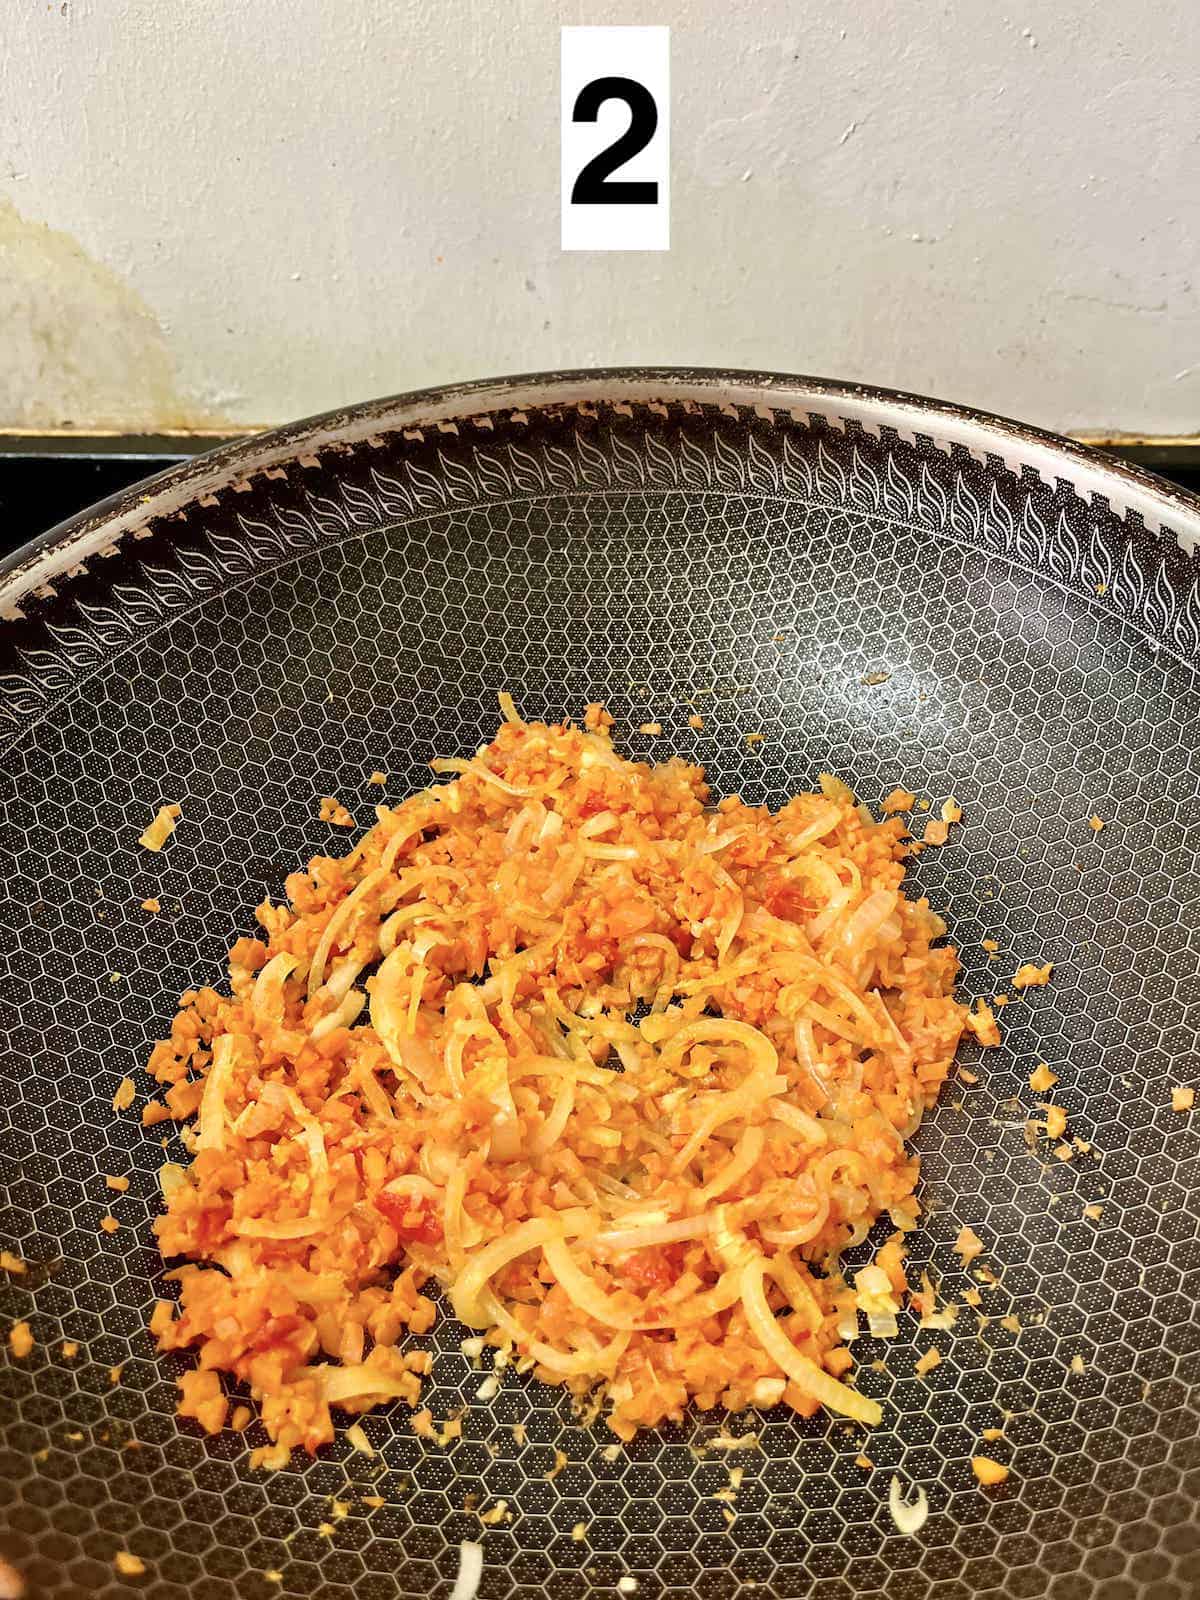 Stir-fried onions and carrots in a chili-garlic paste.